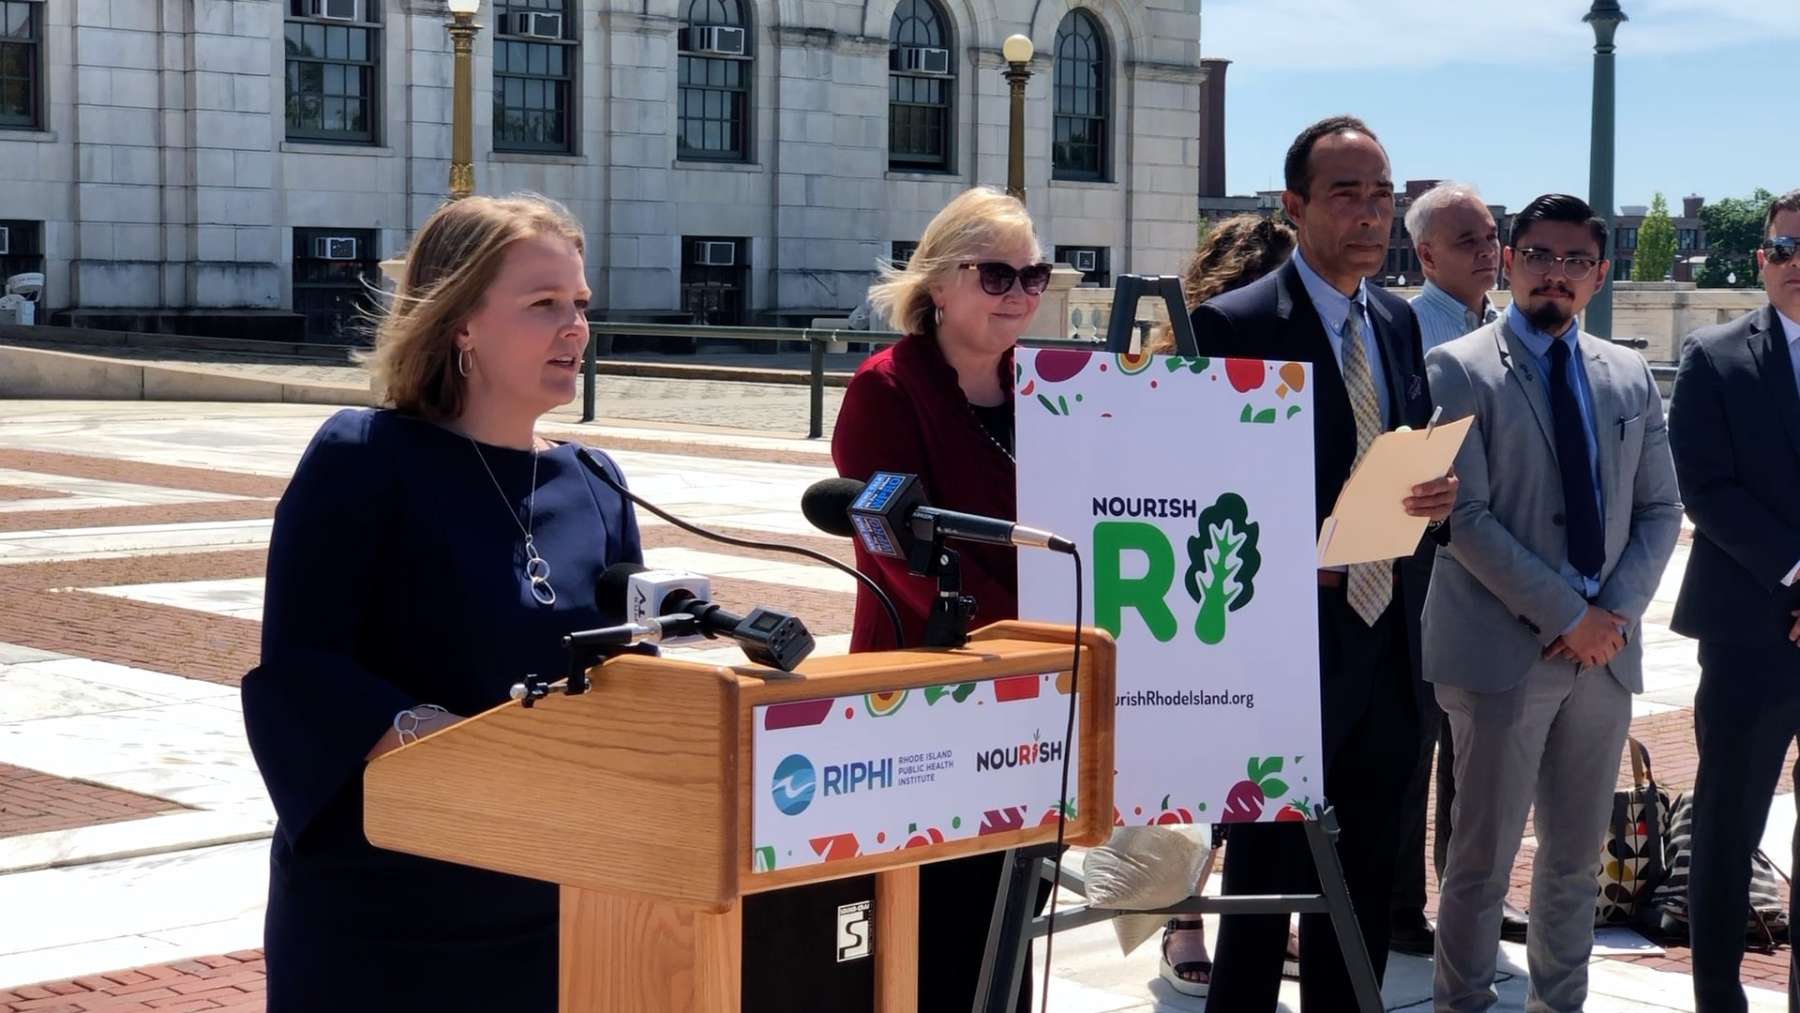 Nourish RI wants to improve public health with small tax on sugar-sweetened beverages